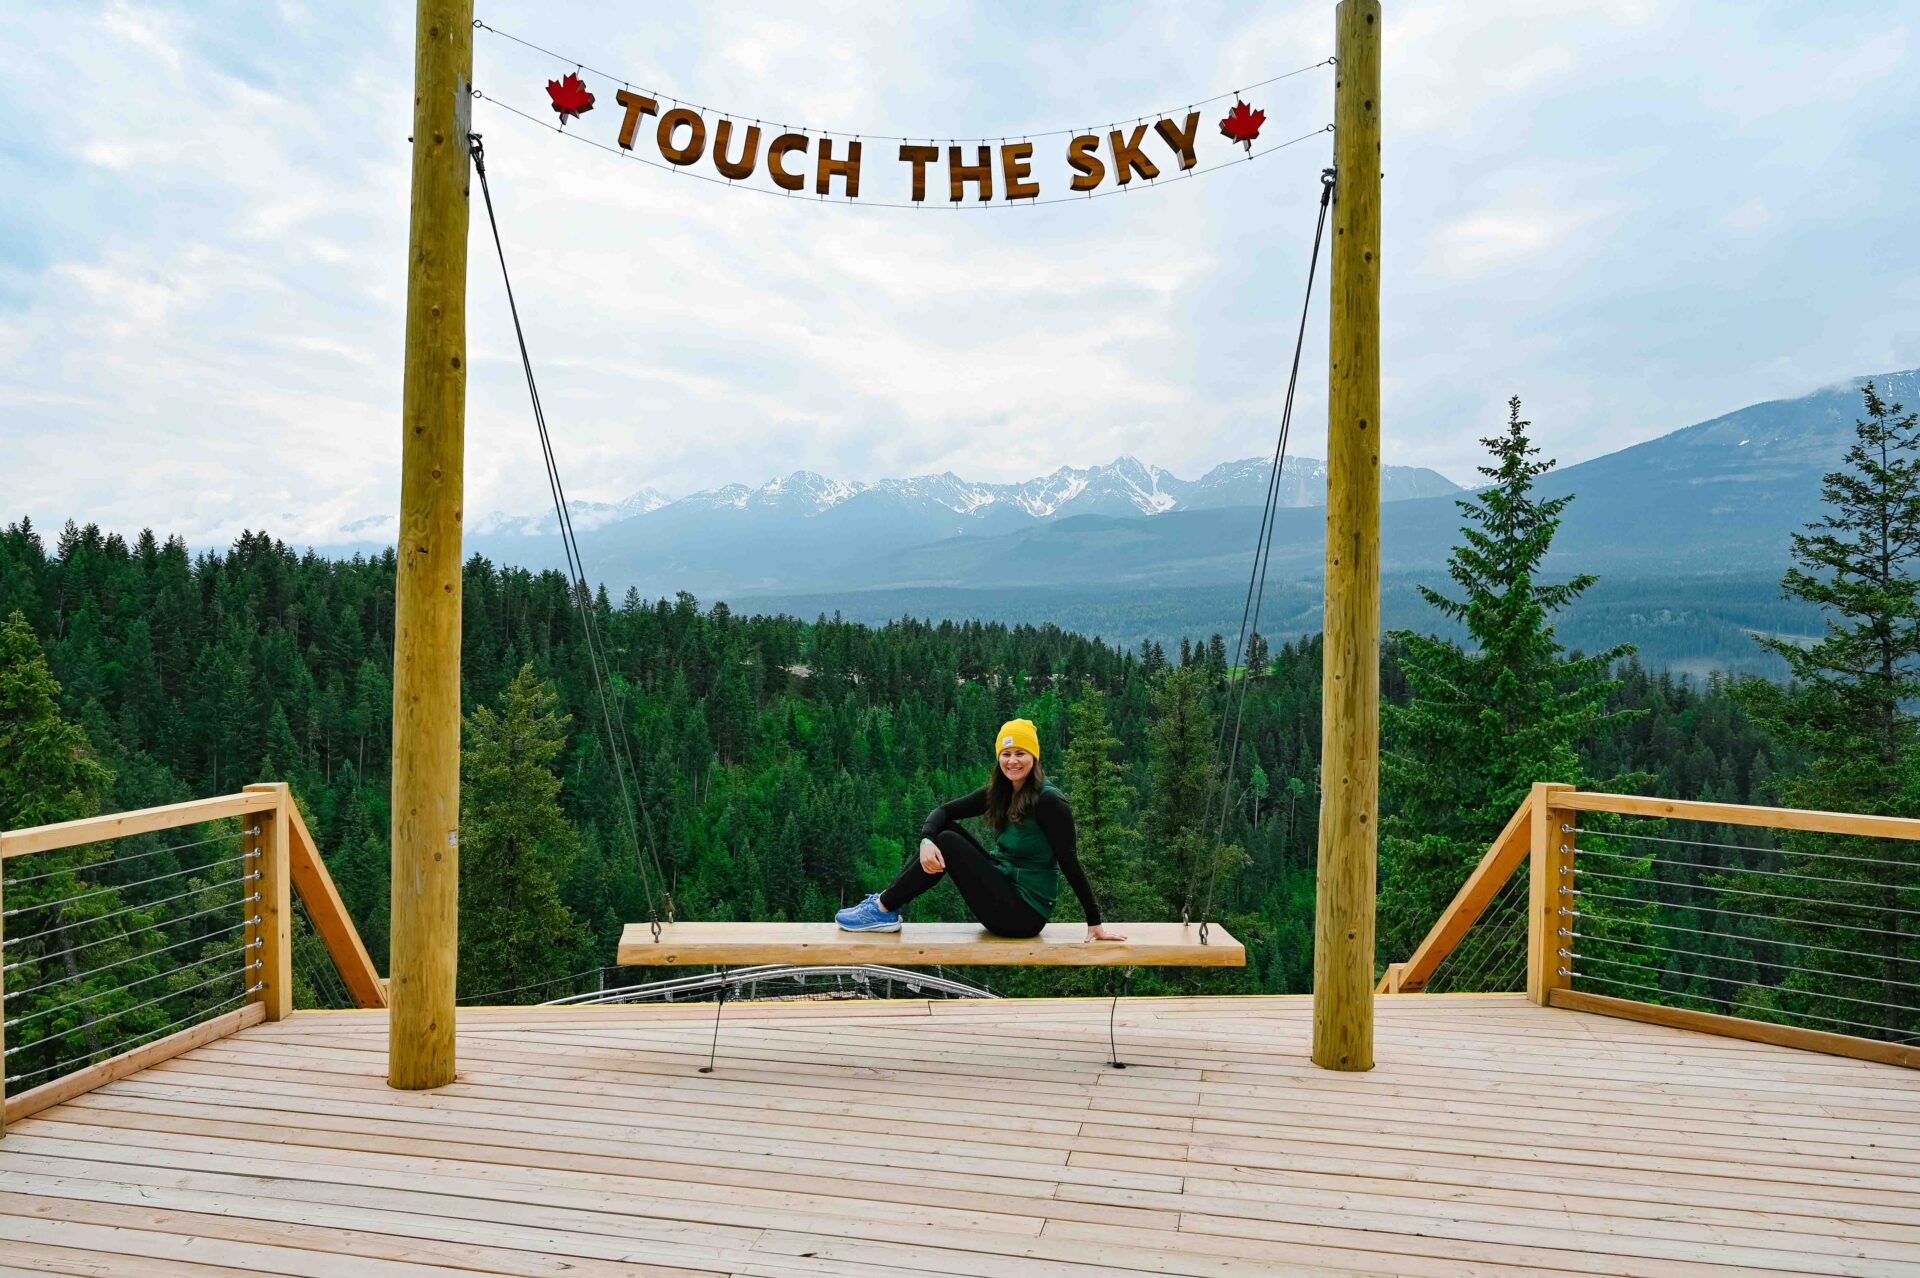 touch the sky viewpoint where a woman sits posing in front of the camera